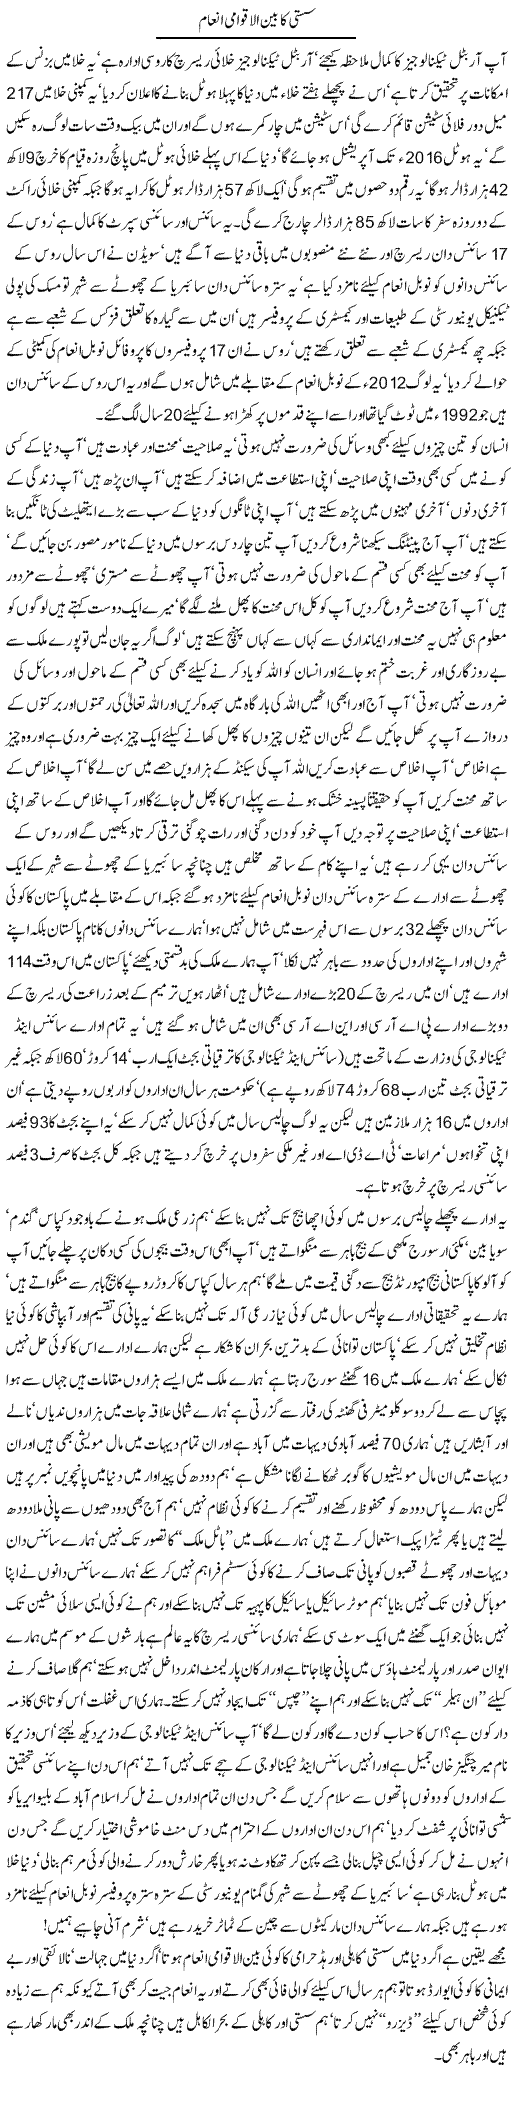 Science and Technology Express Column Javed Chaudhry 23 August 2011